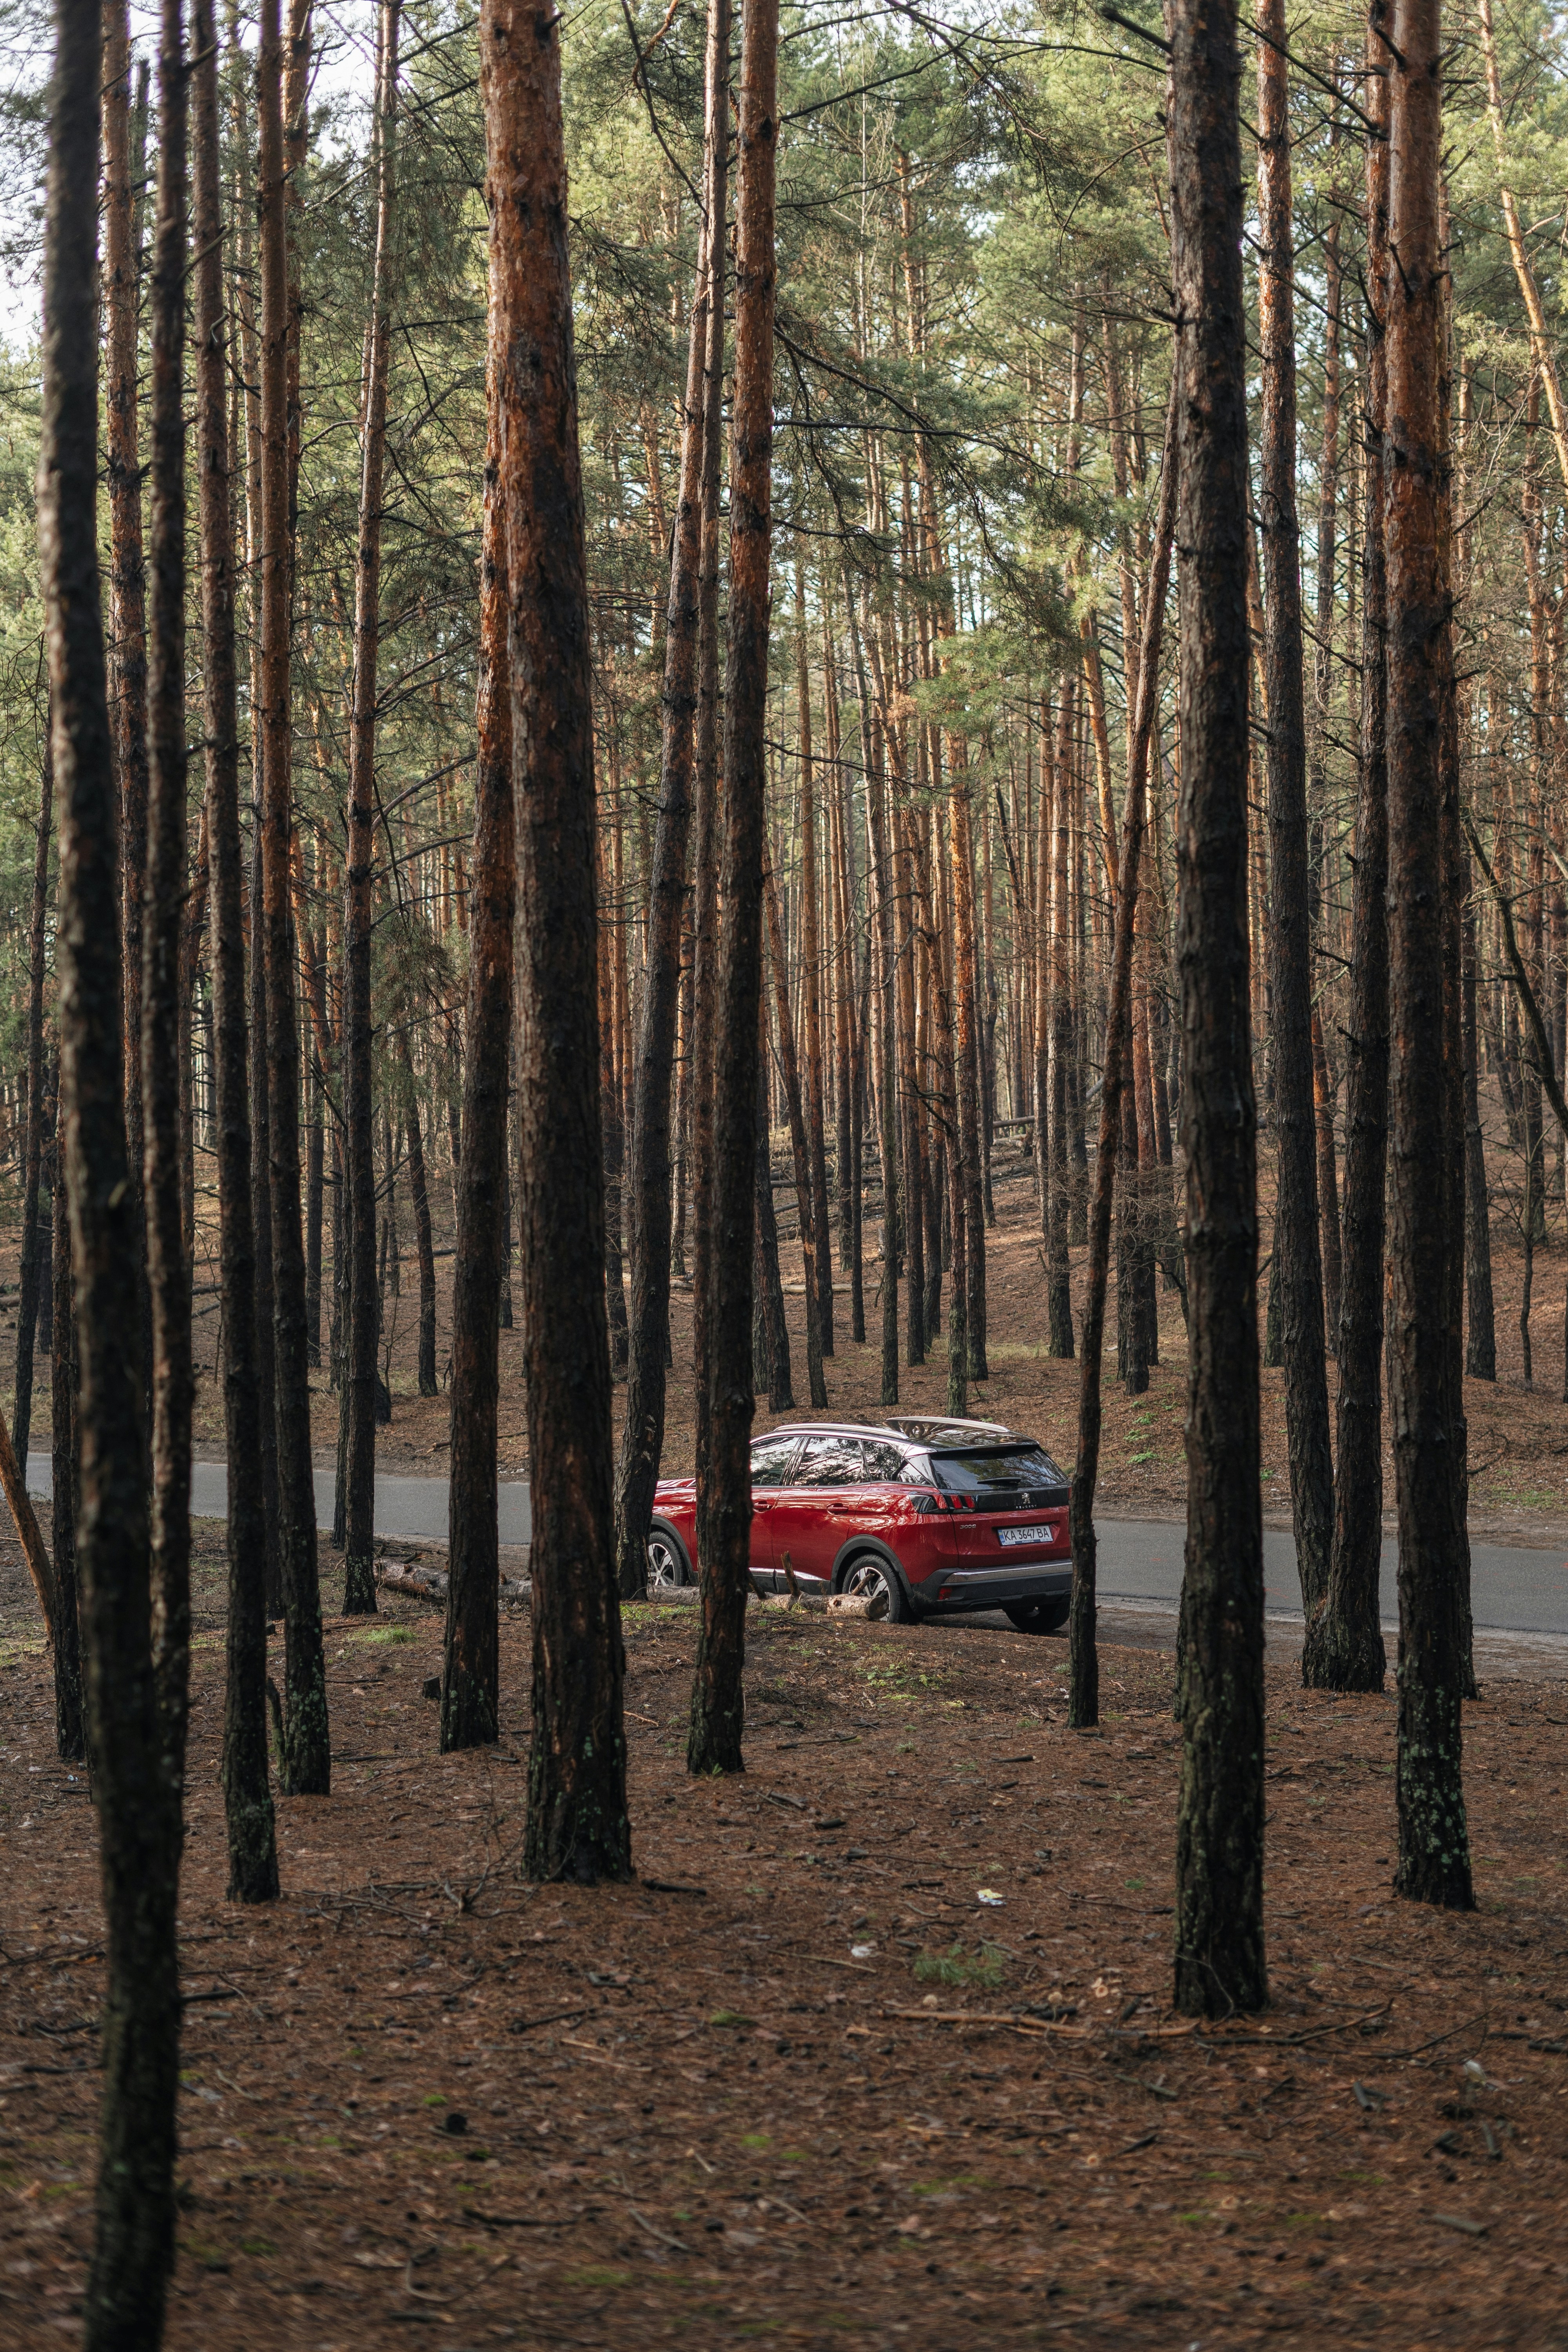 red car in the middle of the forest during daytime